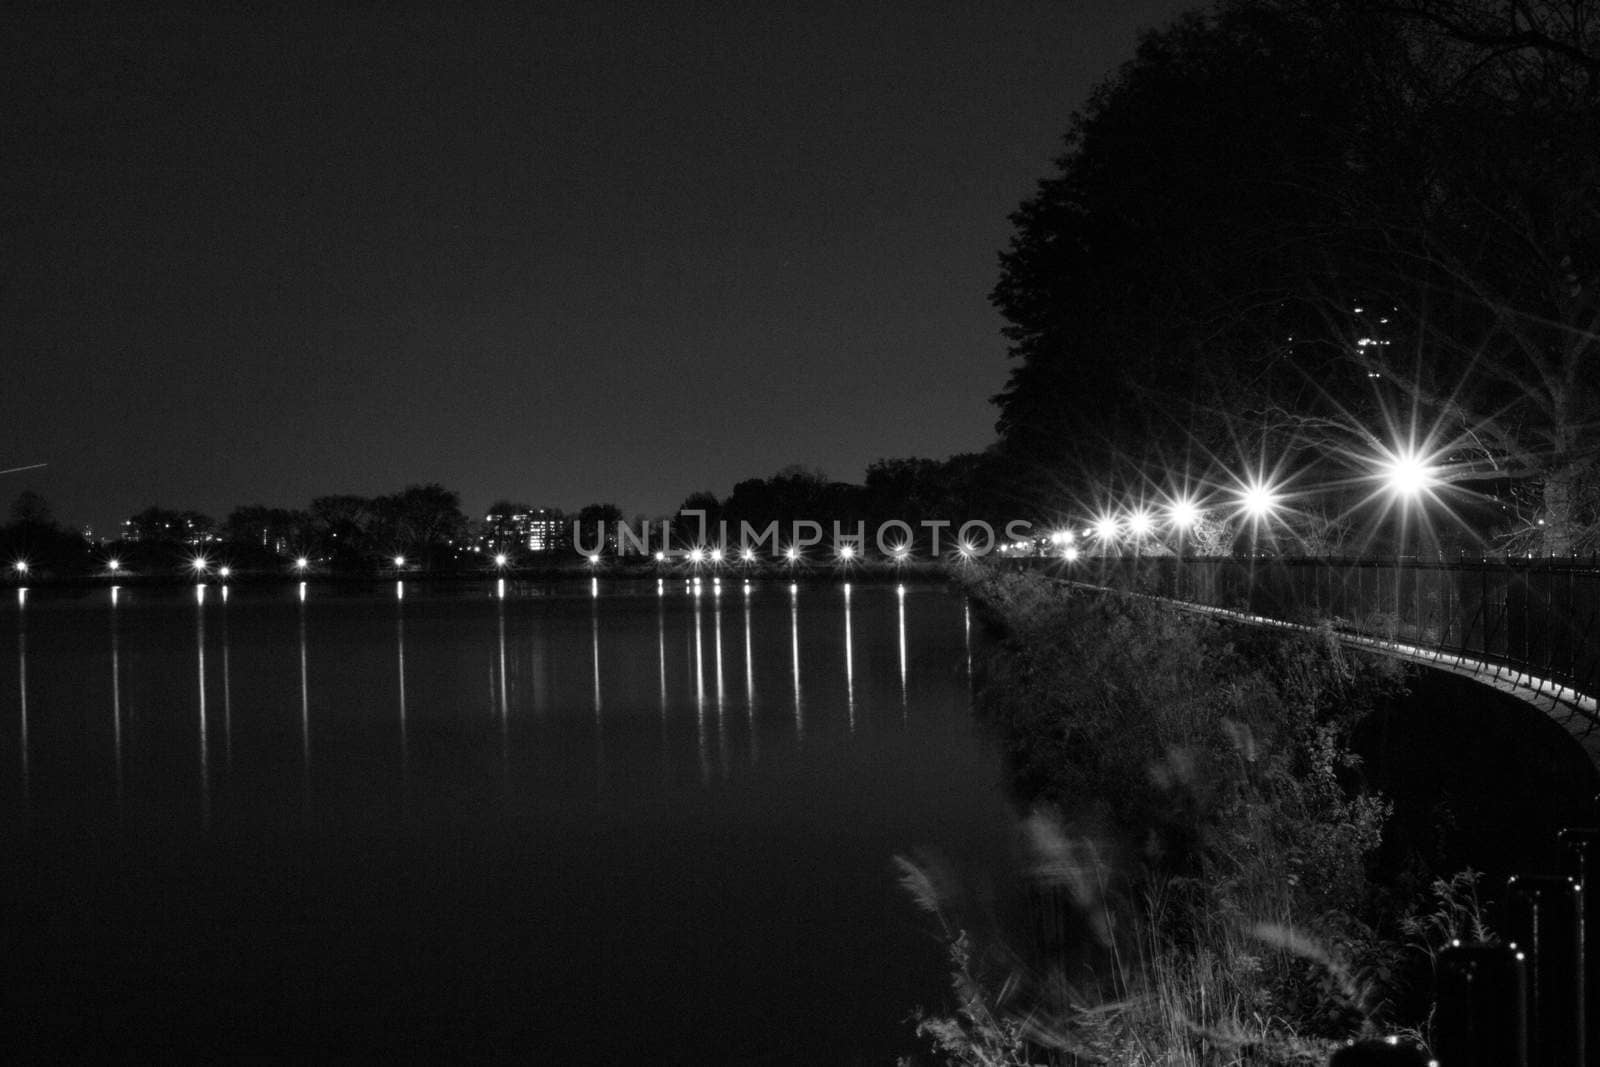 Reservoir at night in black and white by rmbarricarte